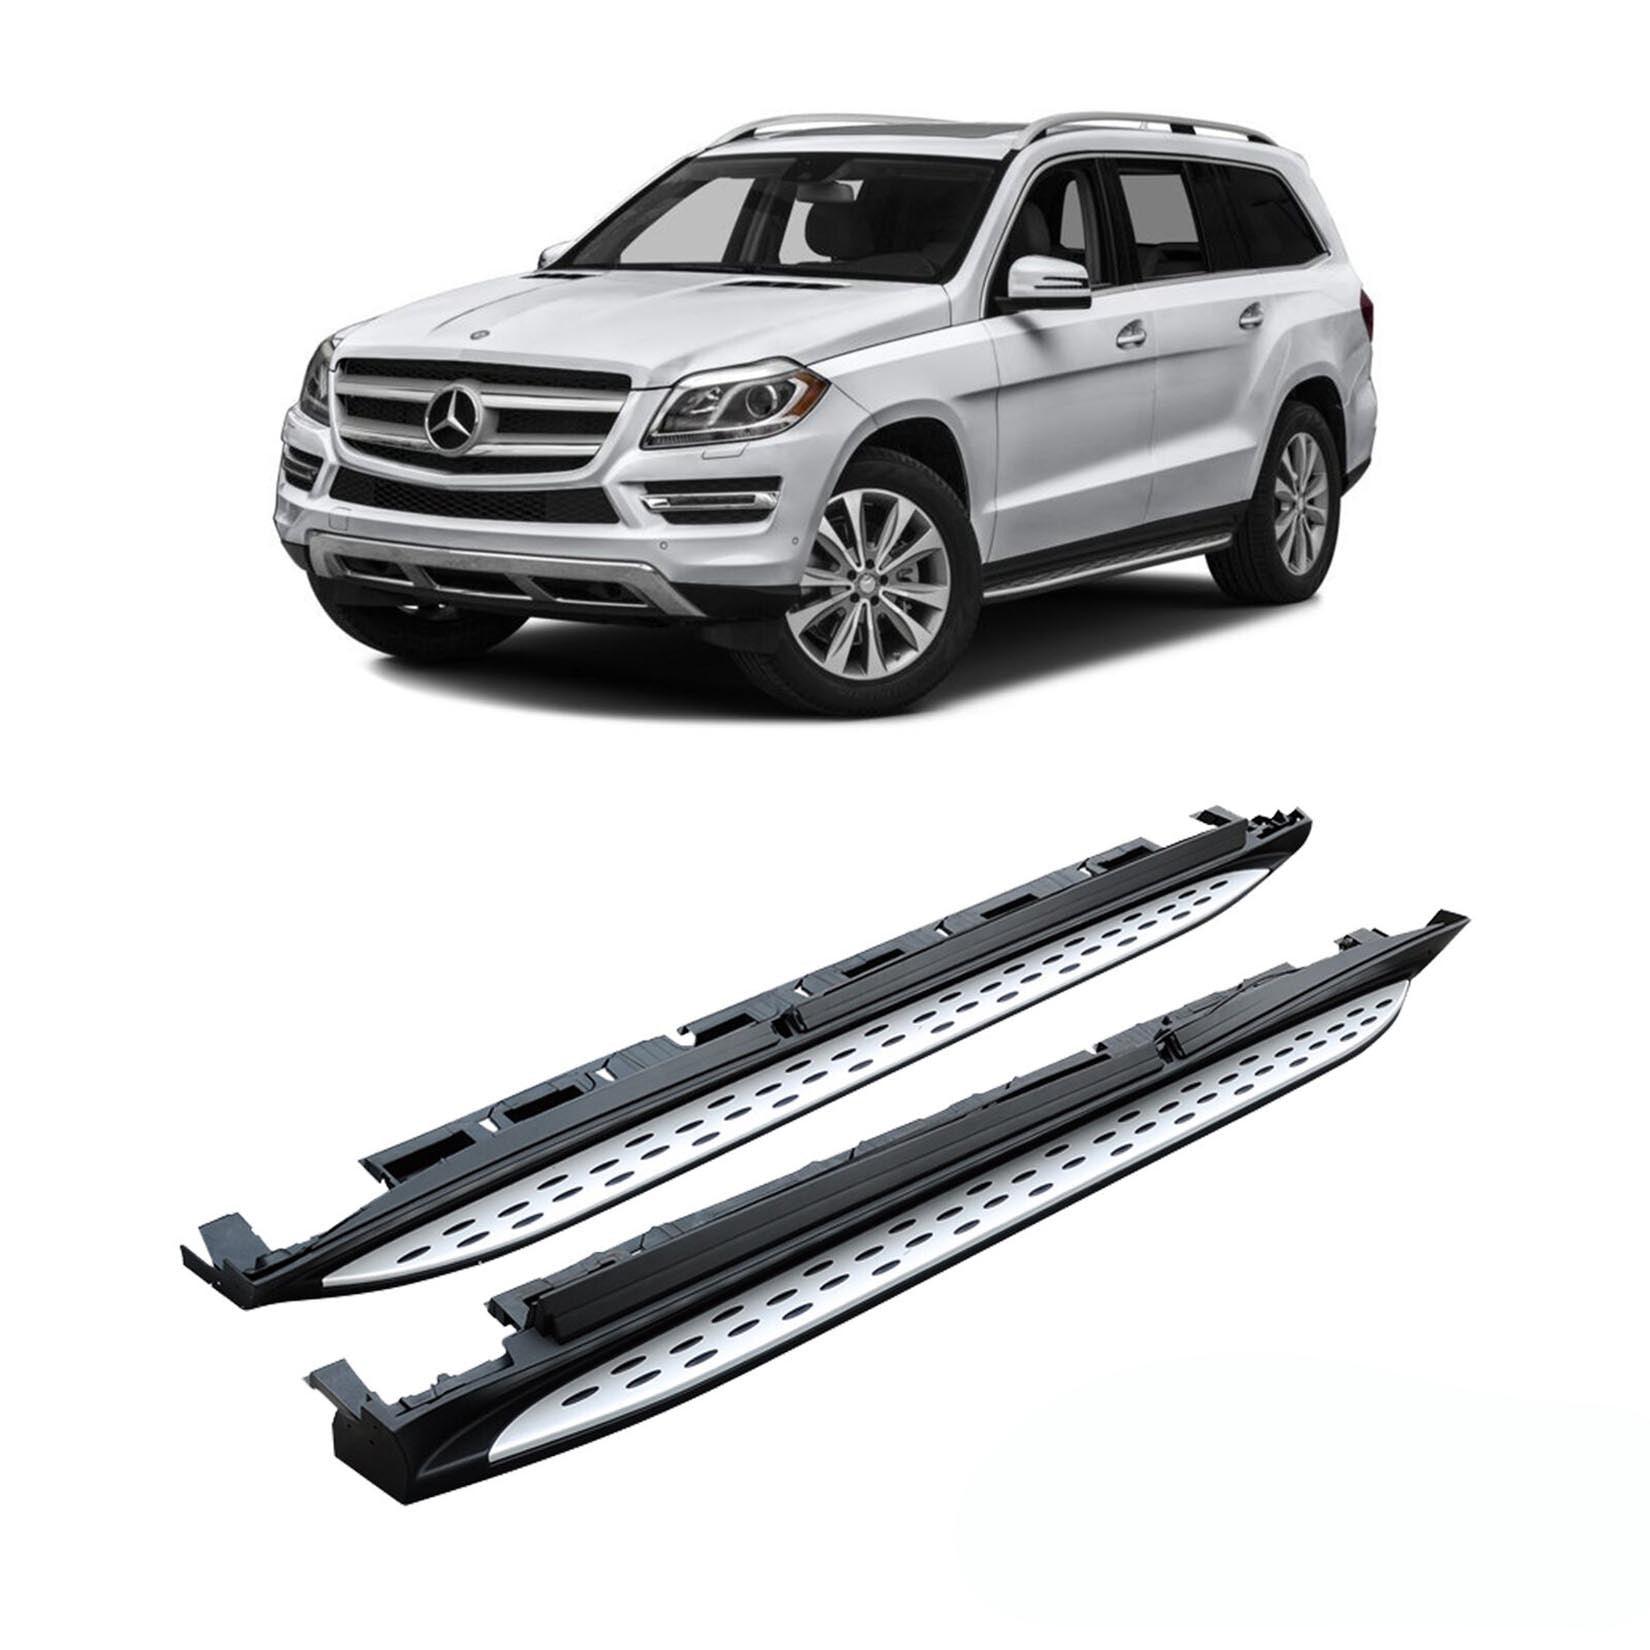 MERCEDES BENZ GL X166 2013 ON - OEM STYLE SIDE STEPS - INTEGRATED RUNNING BOARDS - Storm Xccessories2